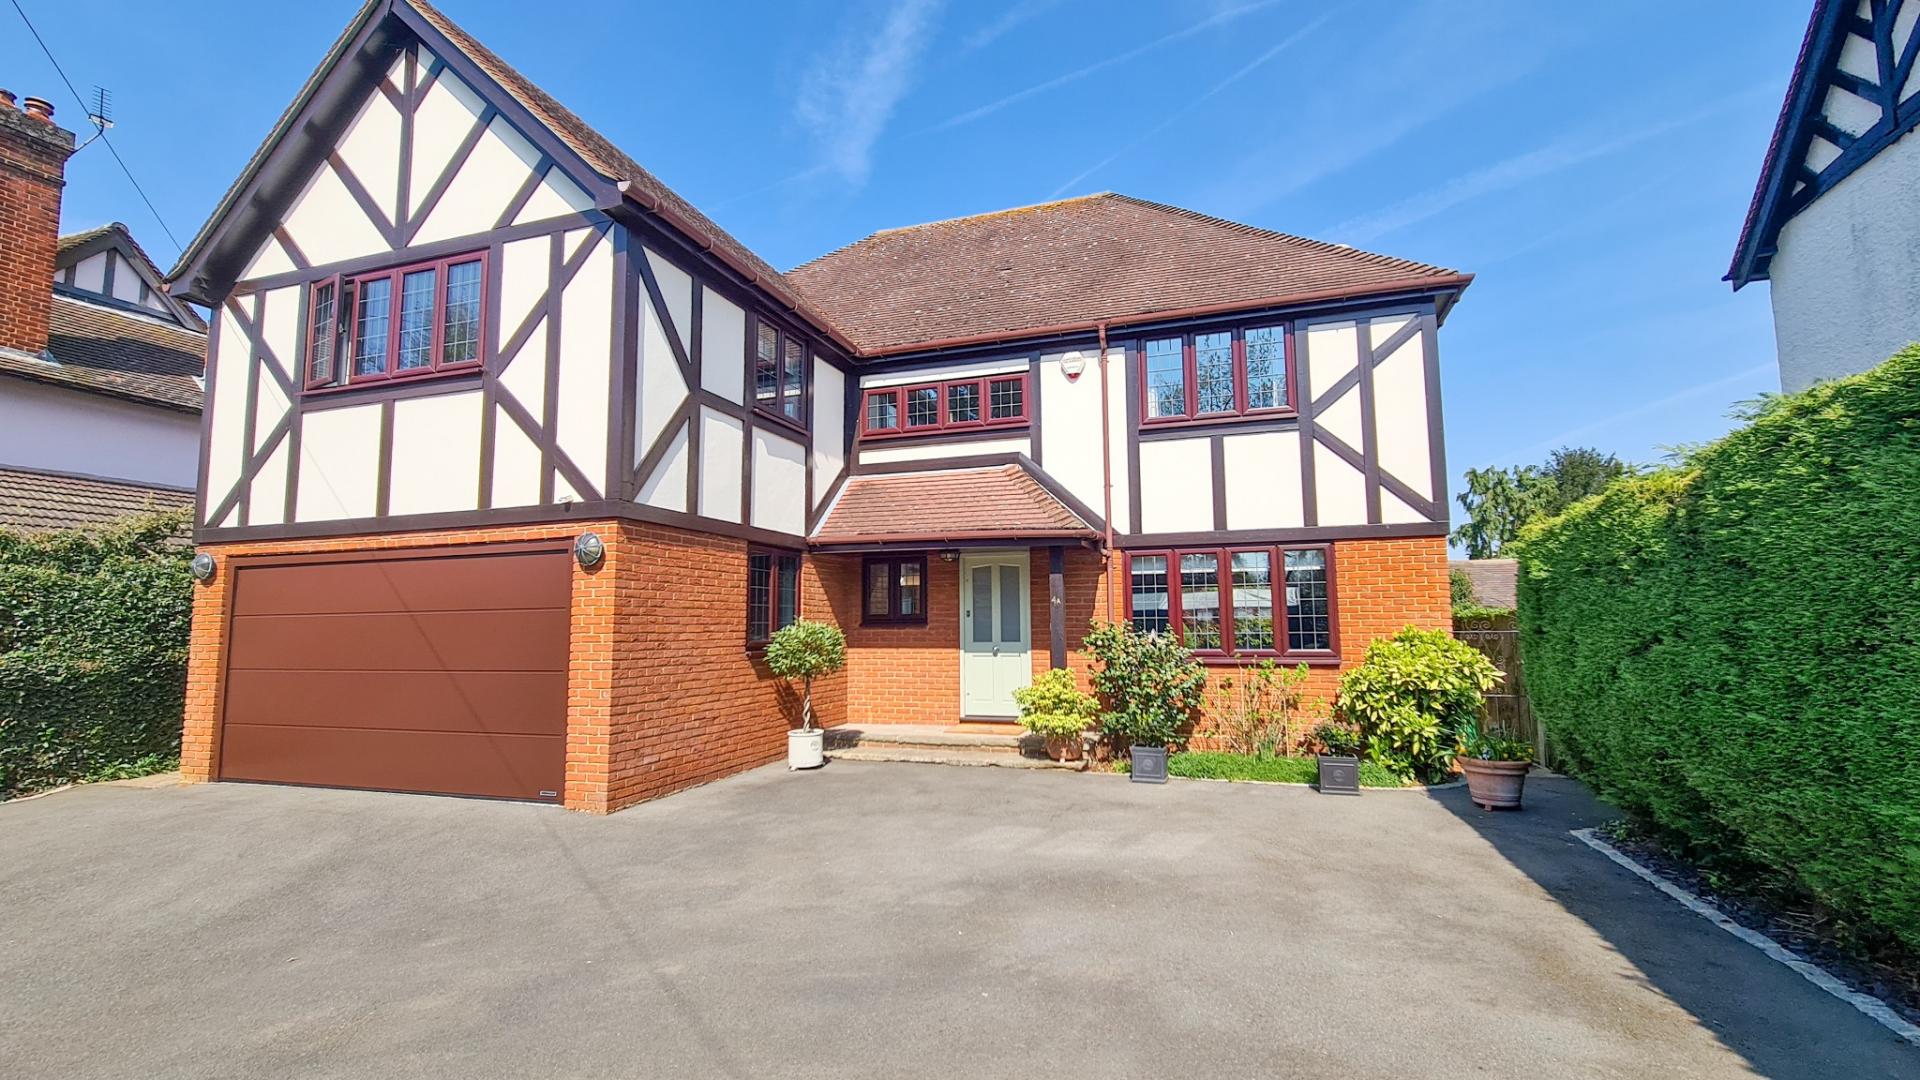 4 Bedroom Detached House for sale in Wraysbury